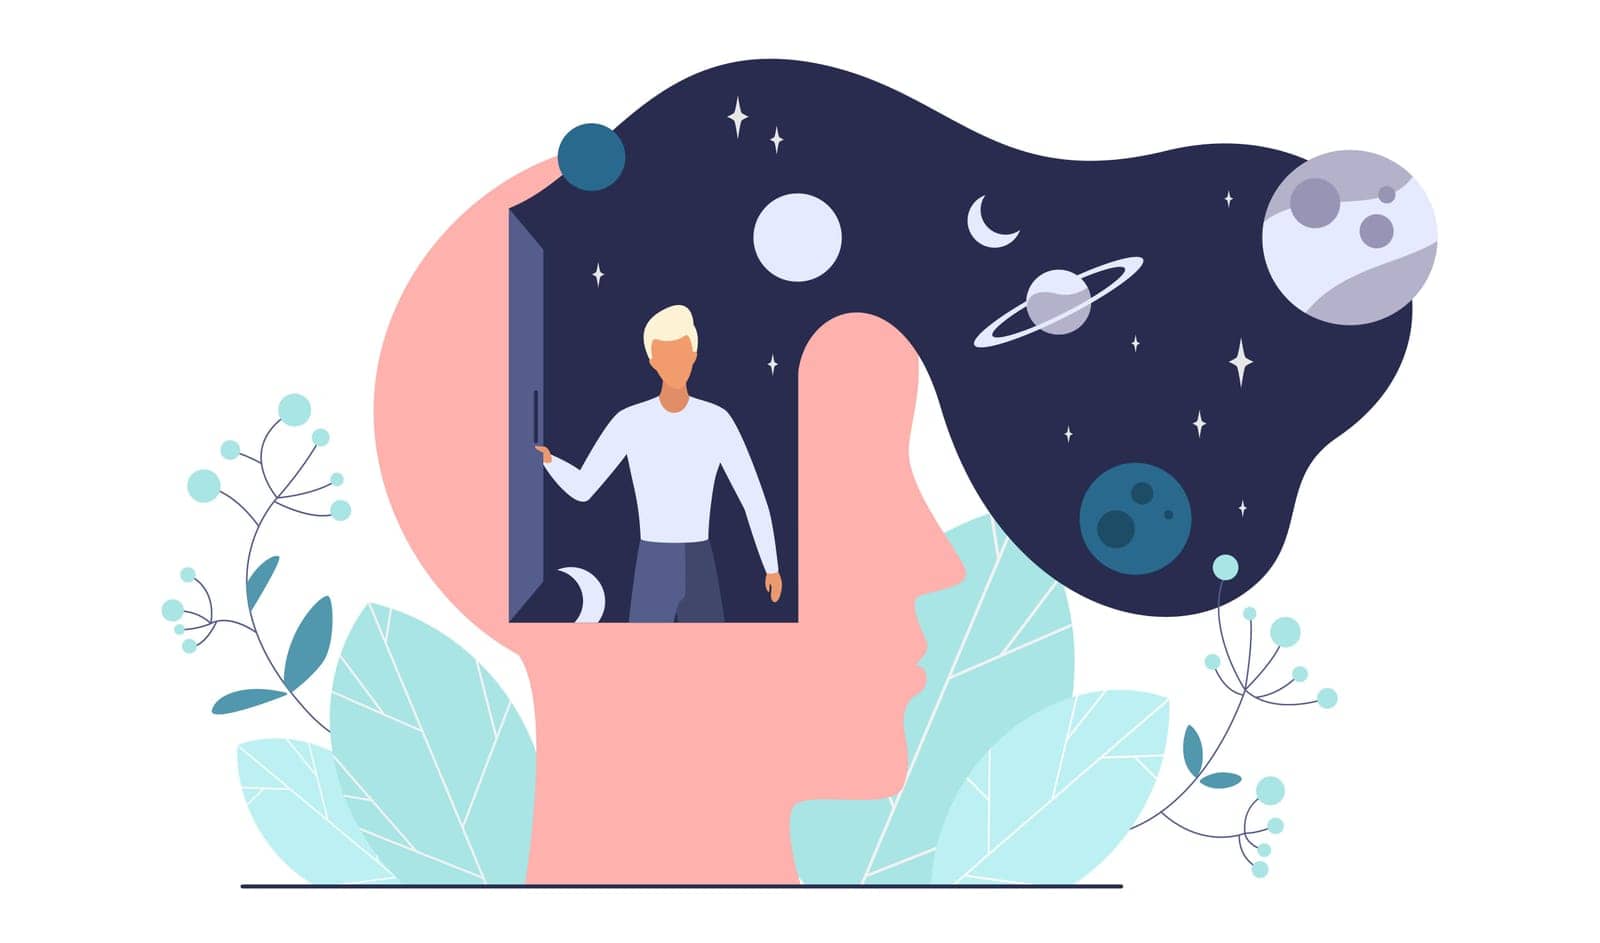 Science insight, inner discovery in surreal brain. Cartoon man at open door in human head, magic cosmos adventure among planets of solar system and stars flat vector illustration. Imagination concept